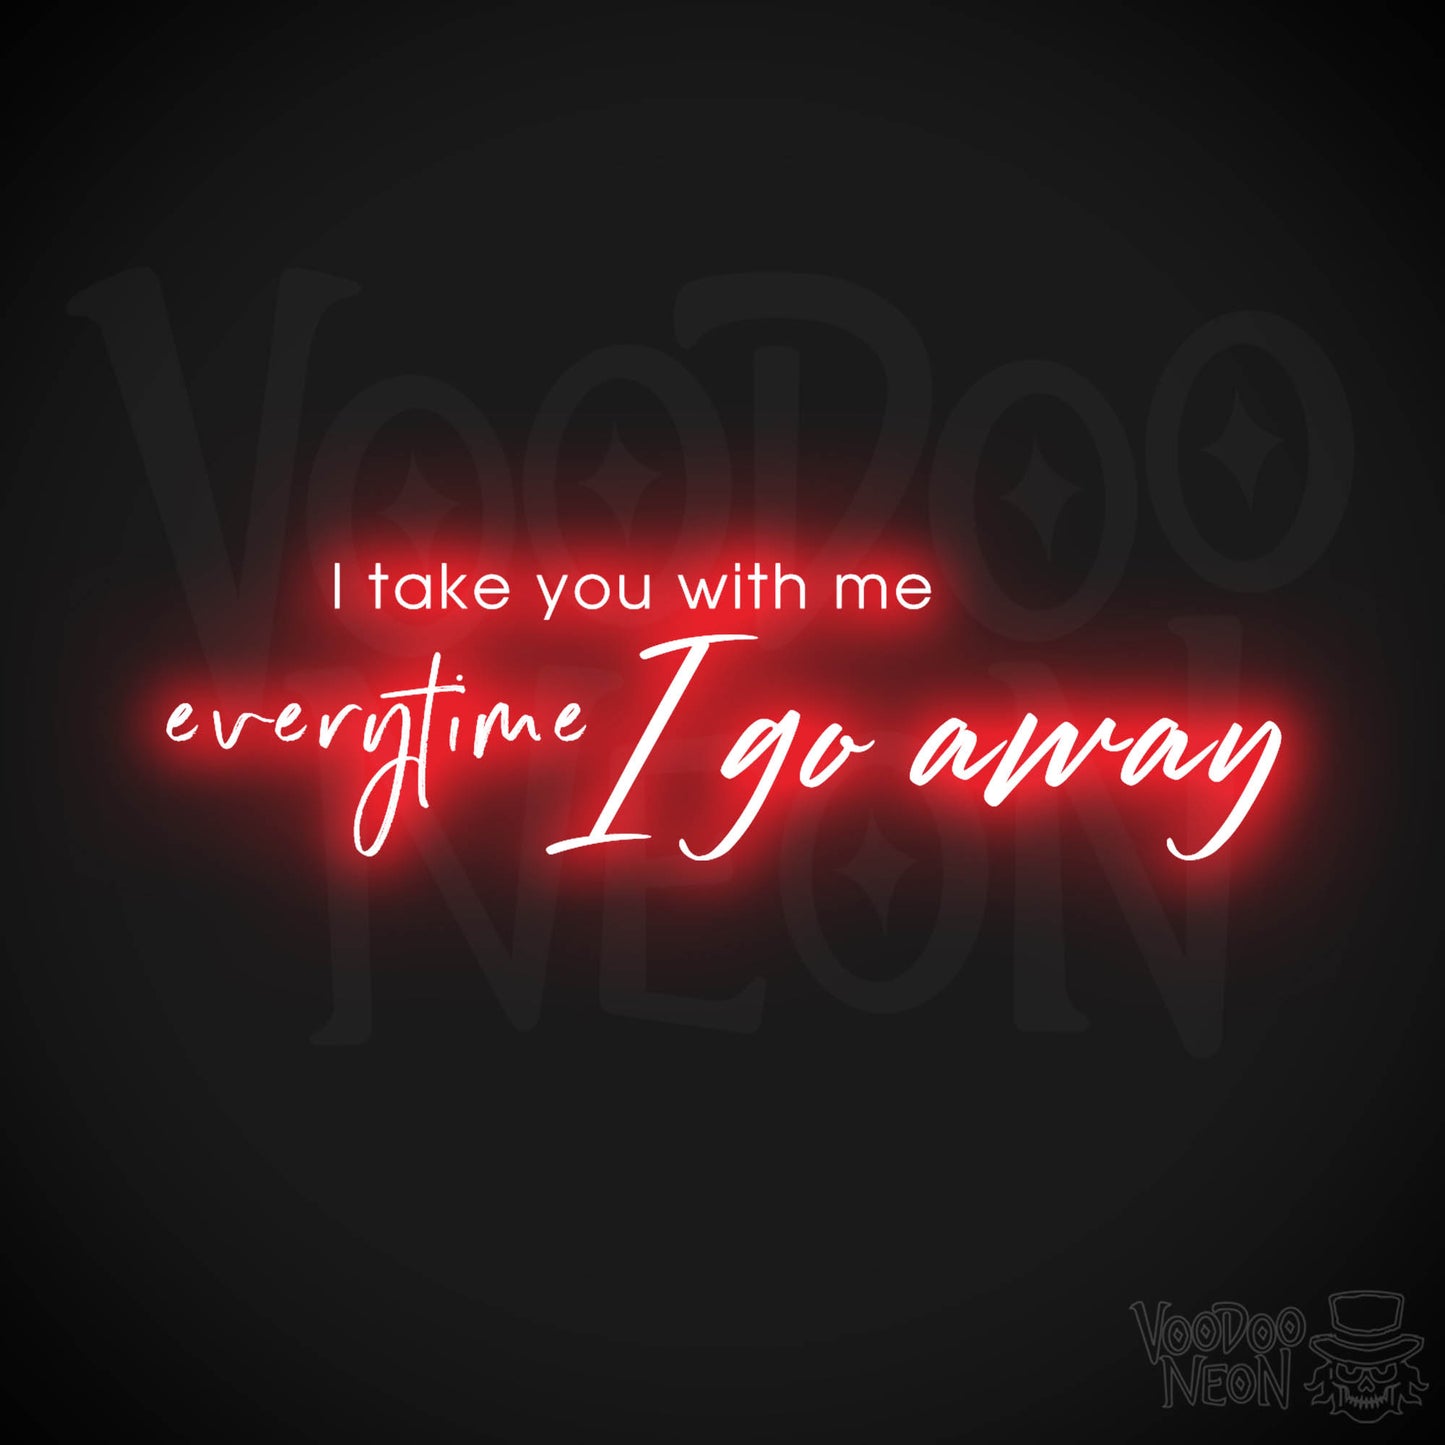 I Take You With Me Every Time You Go Away Neon Sign - LED Wall Art - Color Red